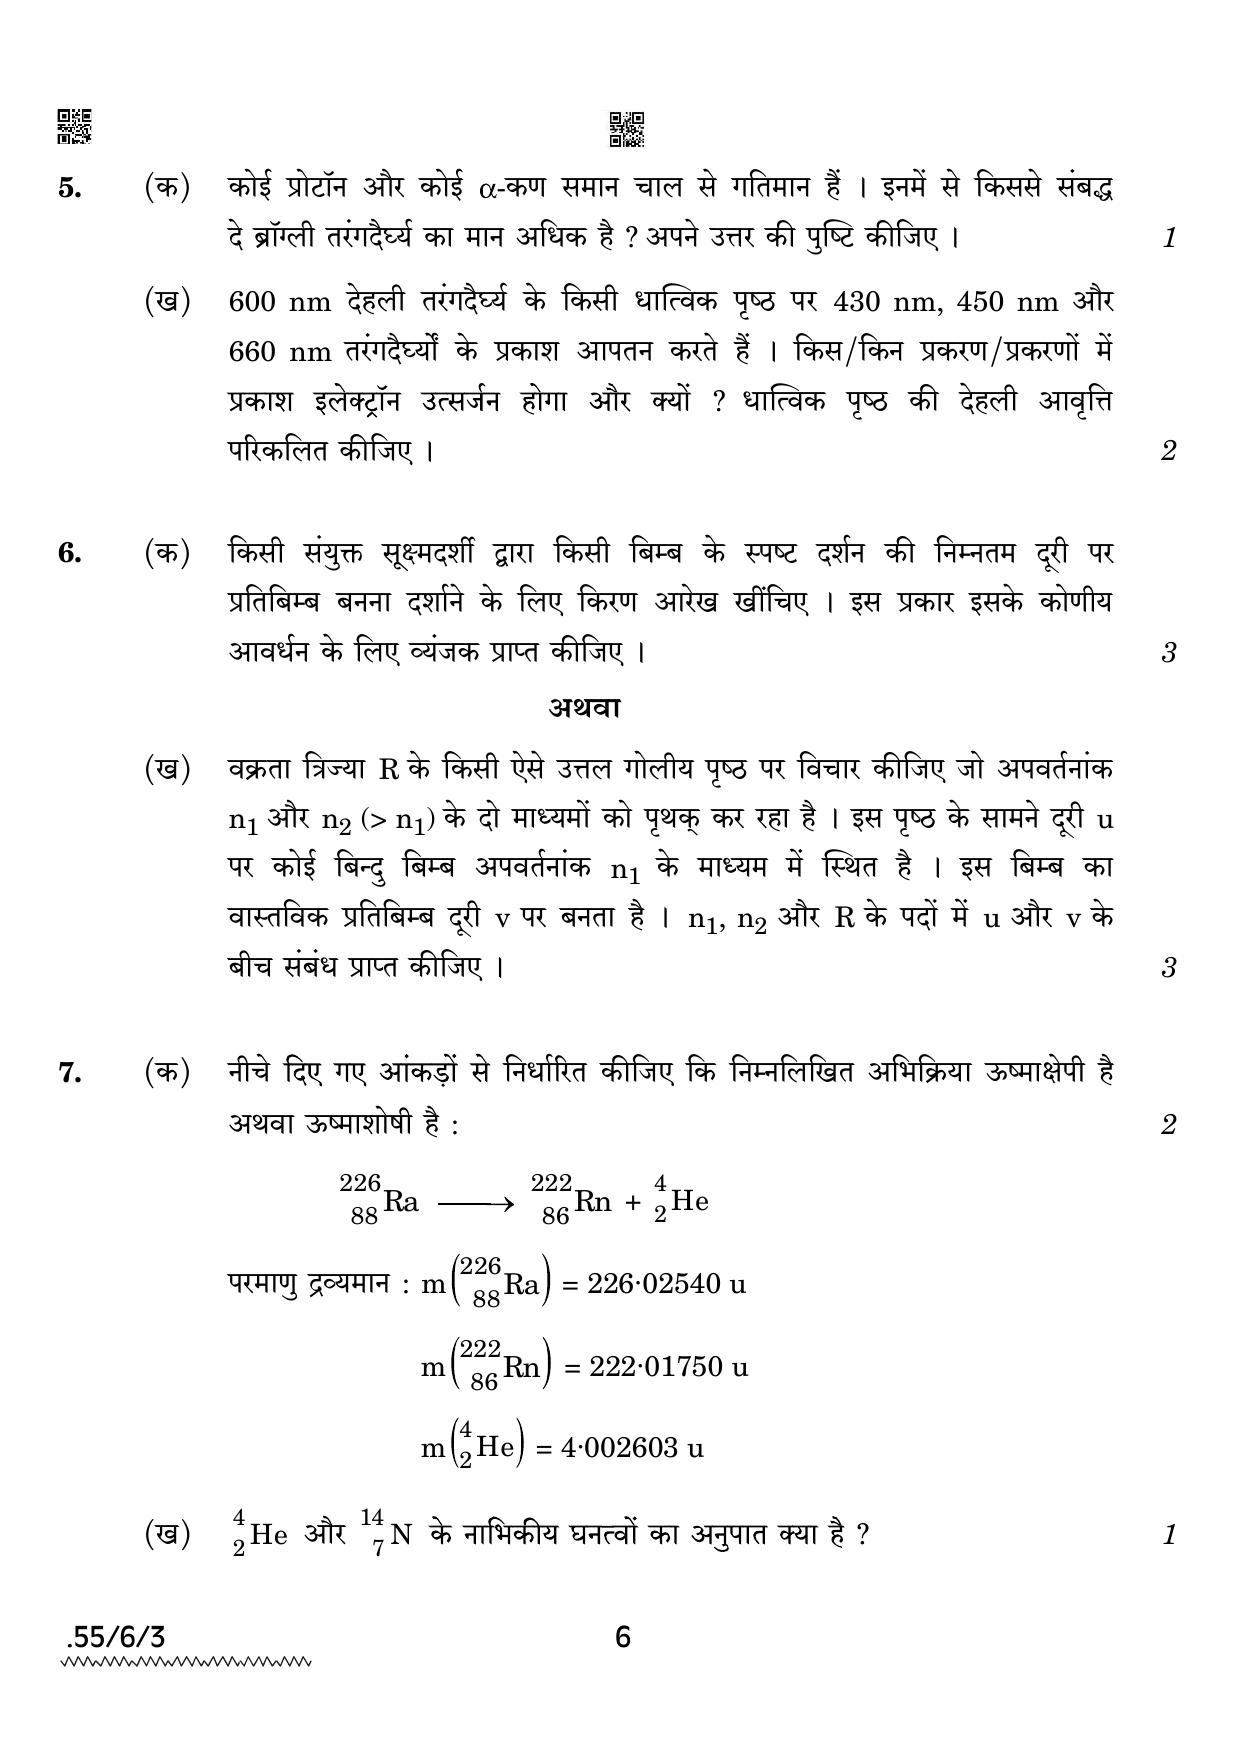 CBSE Class 12 55-6-3 PHYSICS 2022 Compartment Question Paper - Page 6